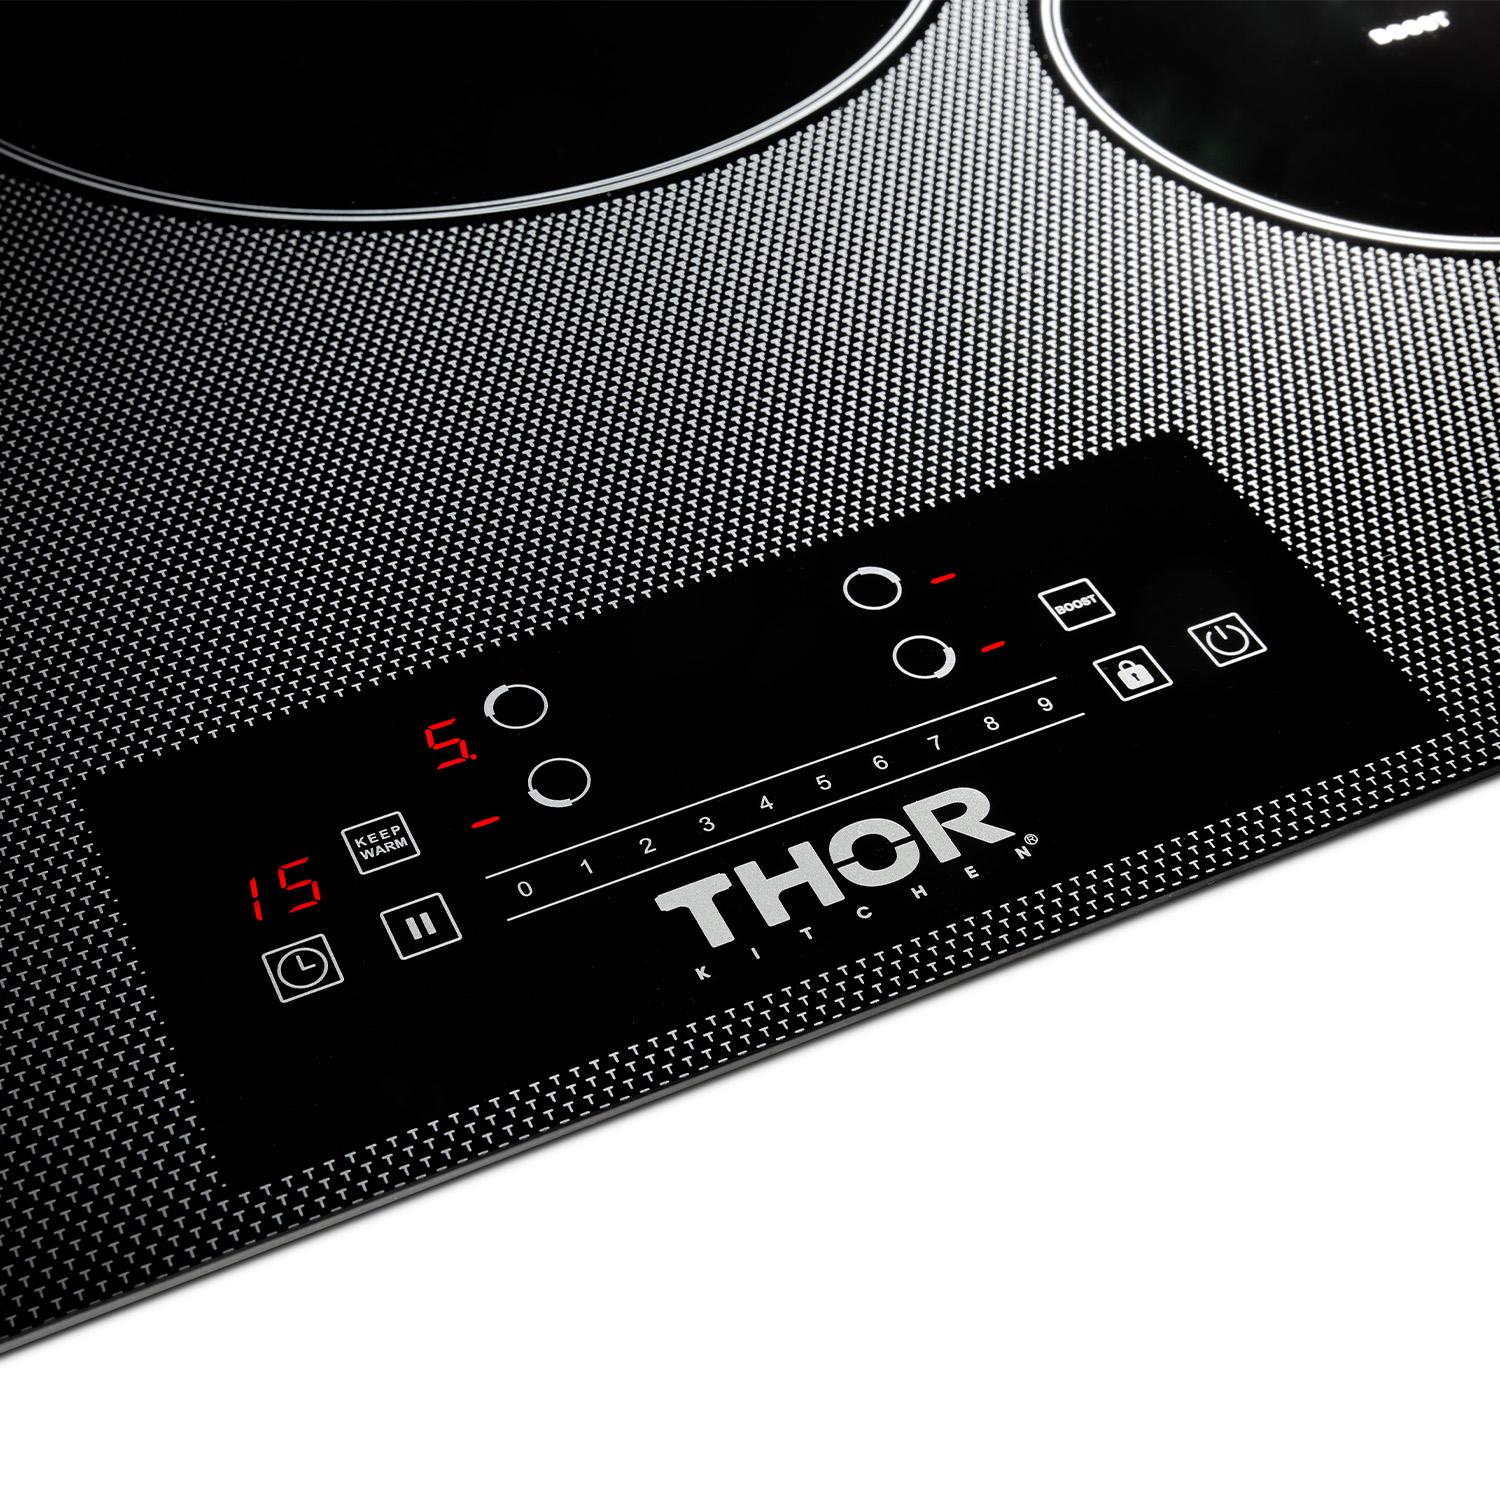 Thor Kitchen 30 Inch Built-in Induction Cooktop With 4 Elements